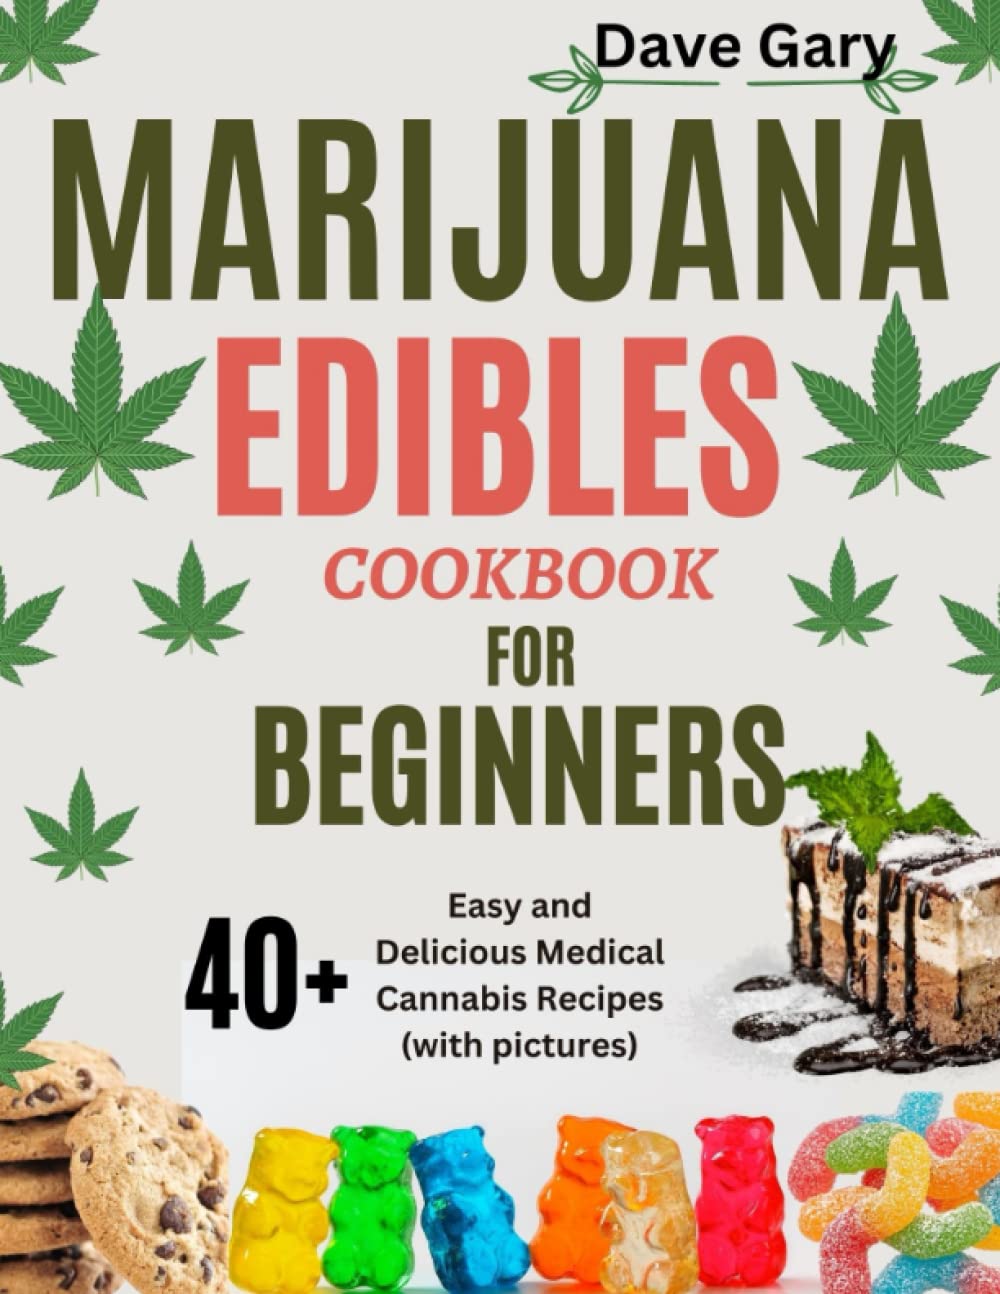 Marijuana Edibles Cookbook For Beginners: 40+ Easy and Delicious Medical Cannabis Recipes (with pictures) (Marijuana A-Z Series)